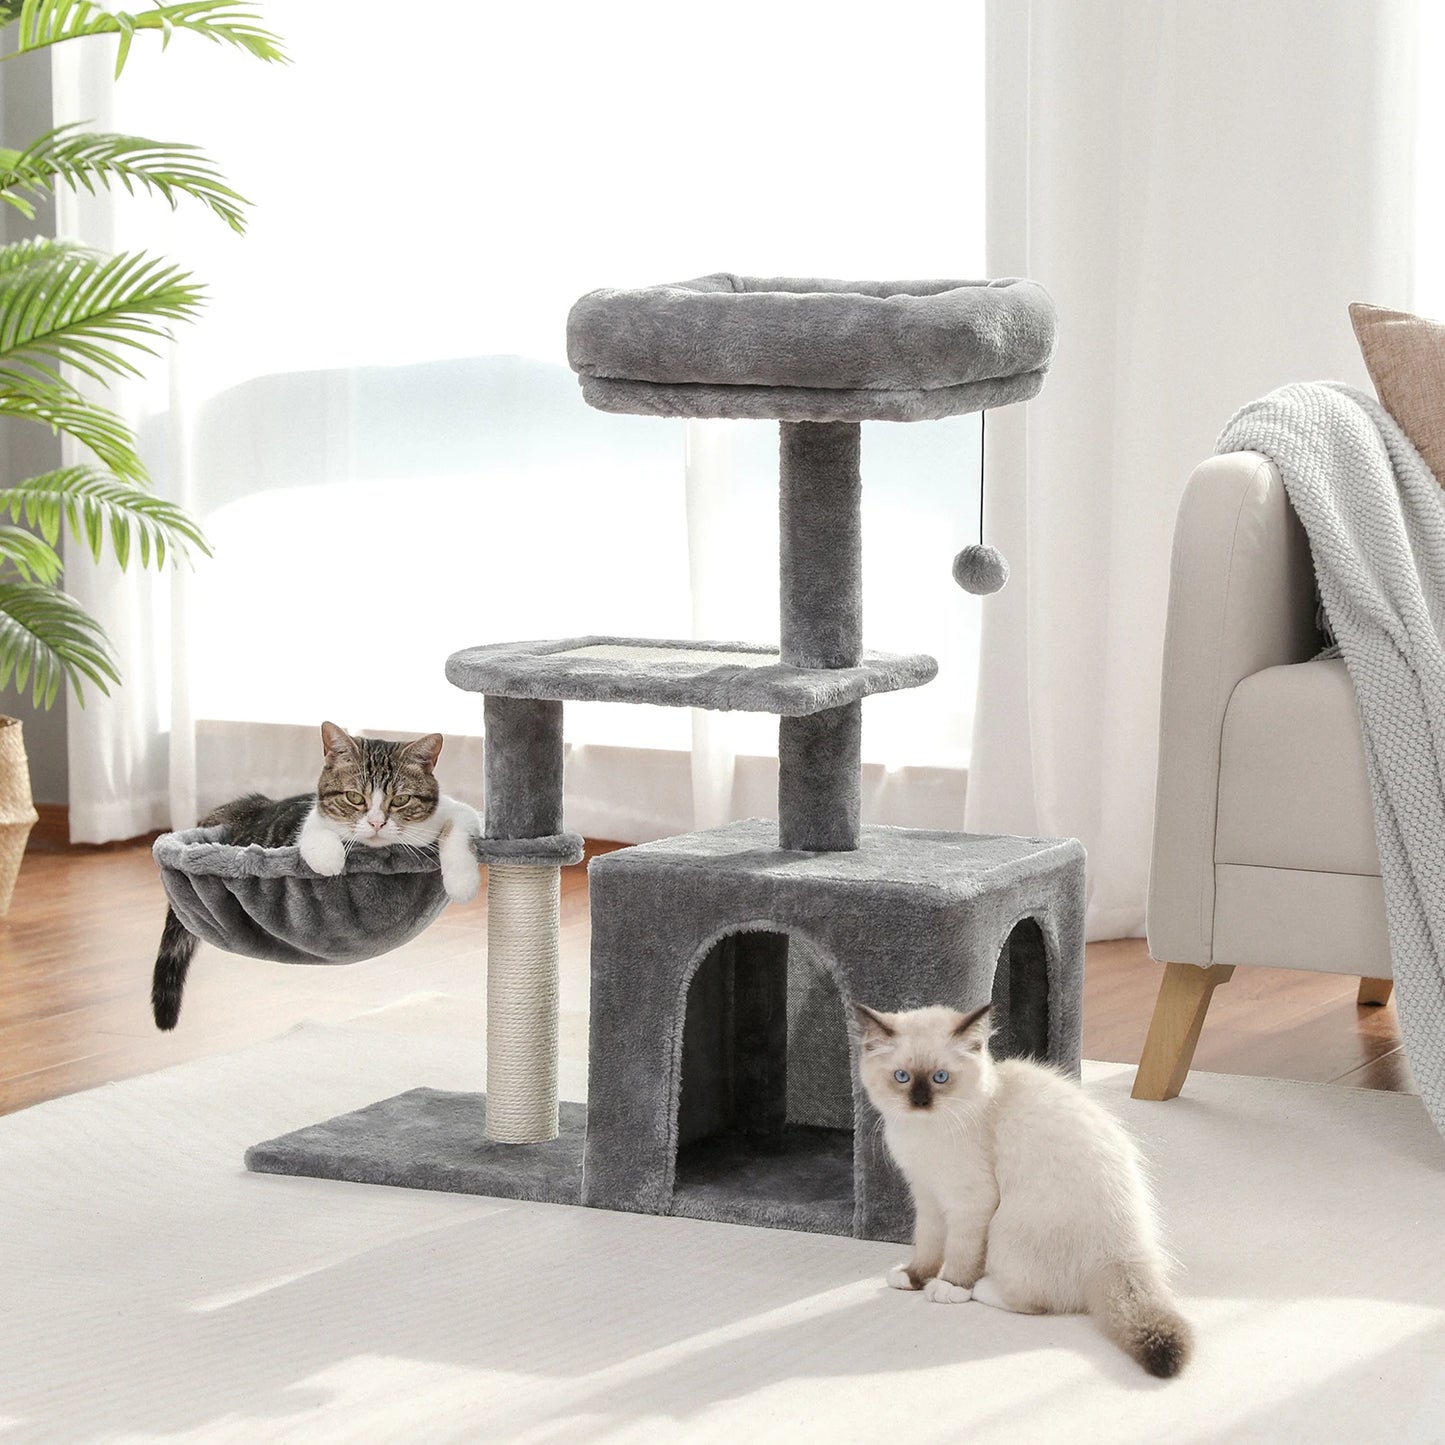 cat stand with hammock, grey plush material with rope on the post, hanging ball from bottom of top tier which is a soft sided bed, second tier is flat covered with the plush material, the hammock sits just below the second tier, the bottom tier has a covered condo for the cat to hide